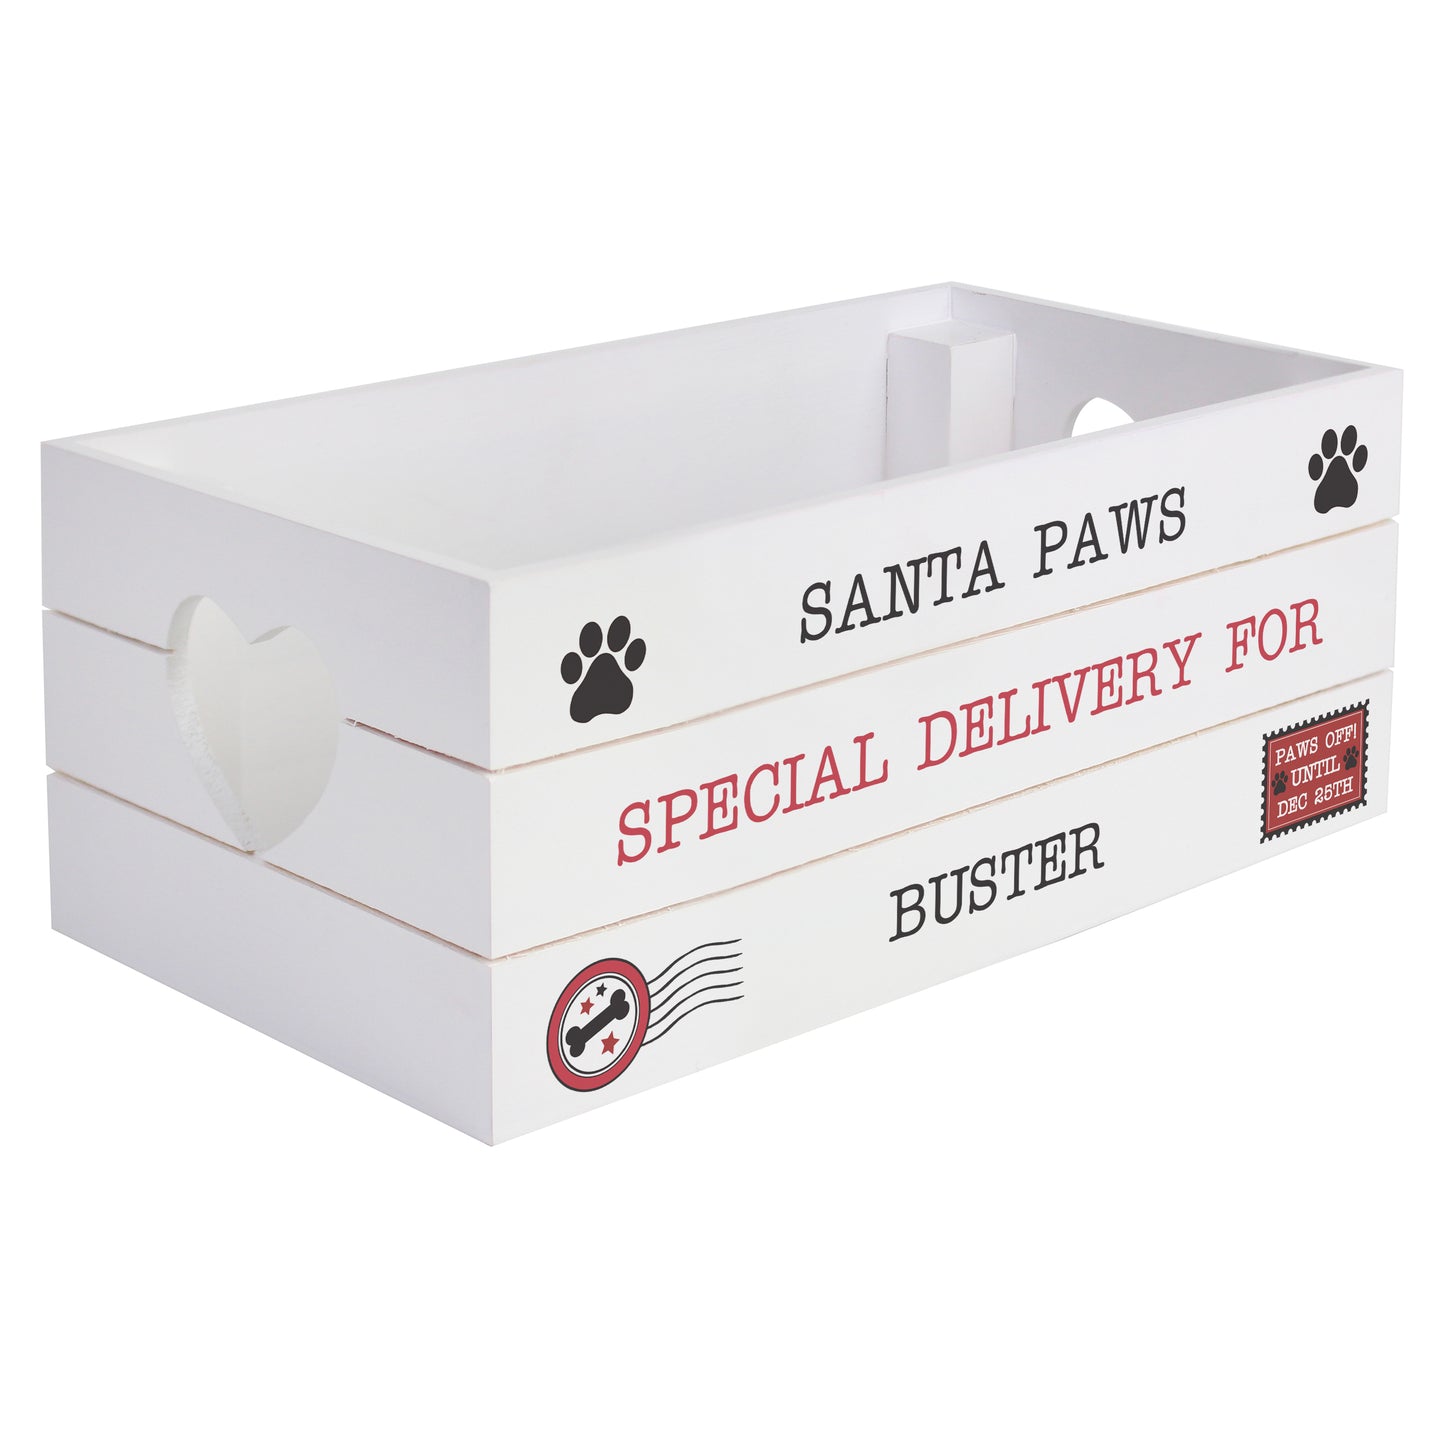 Personalised Santa Paws White Wooden Crate - Personalise It!